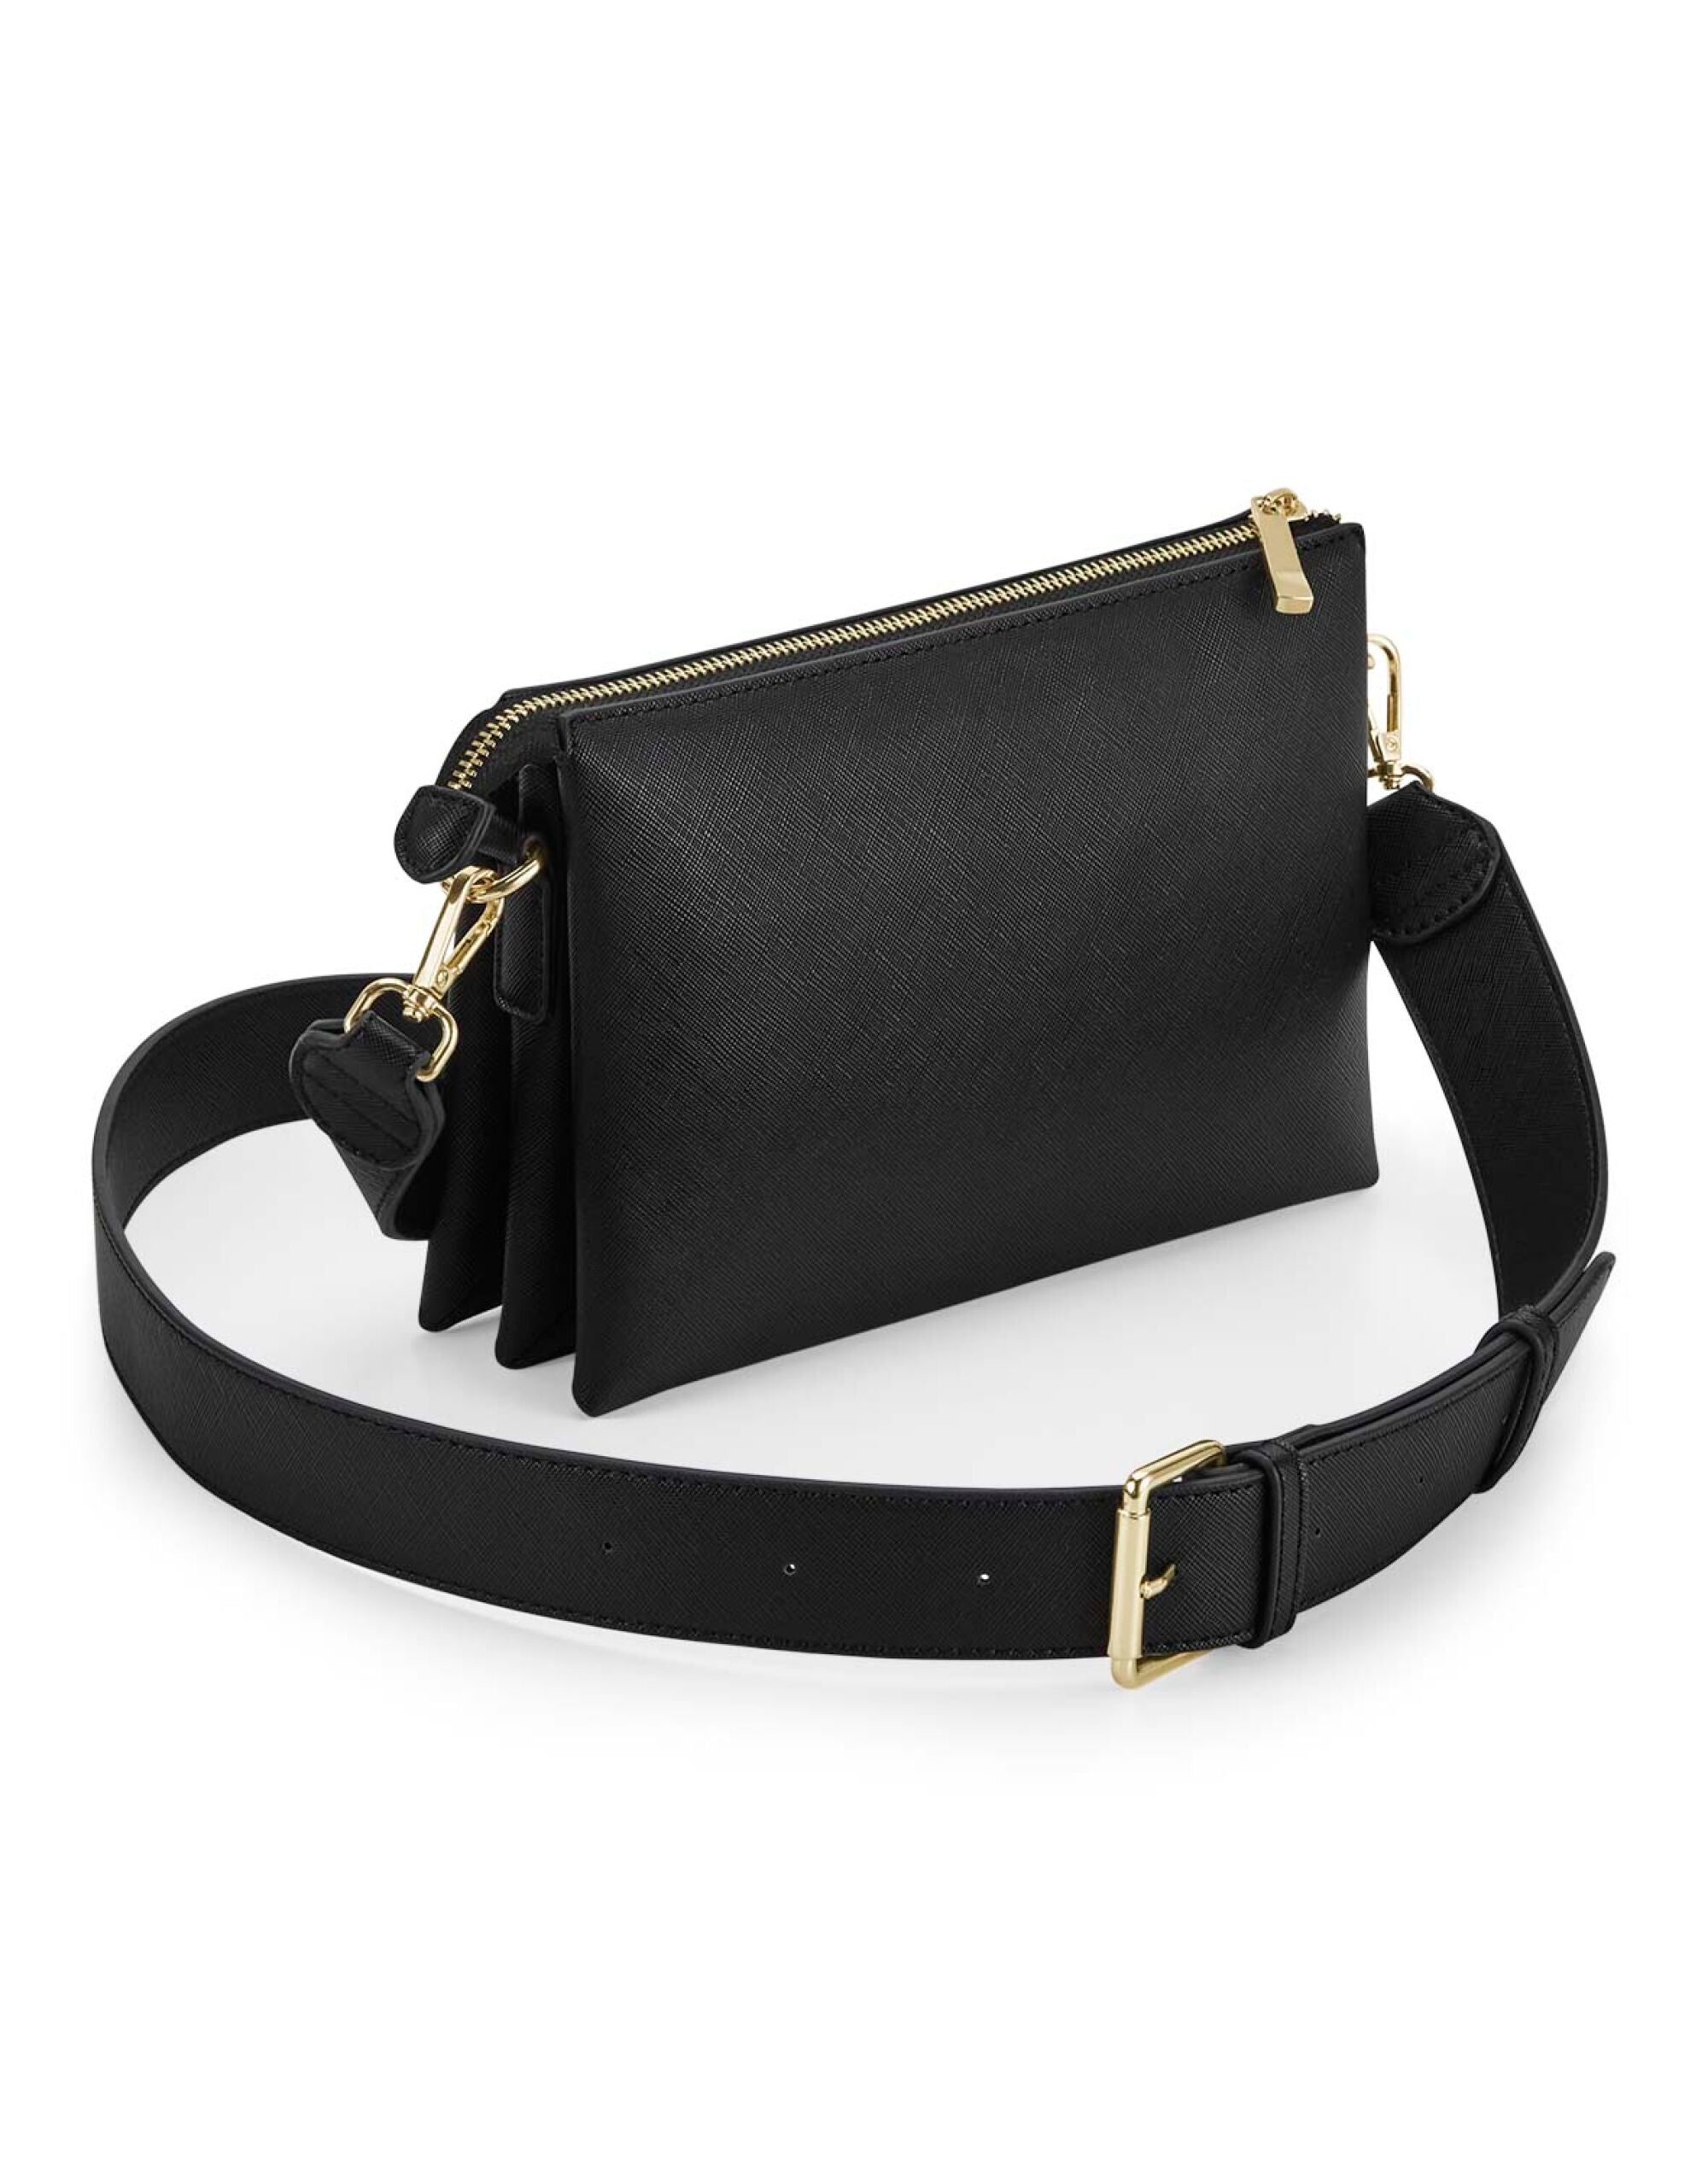 Bagbase Boutique Soft Cross Body Bag